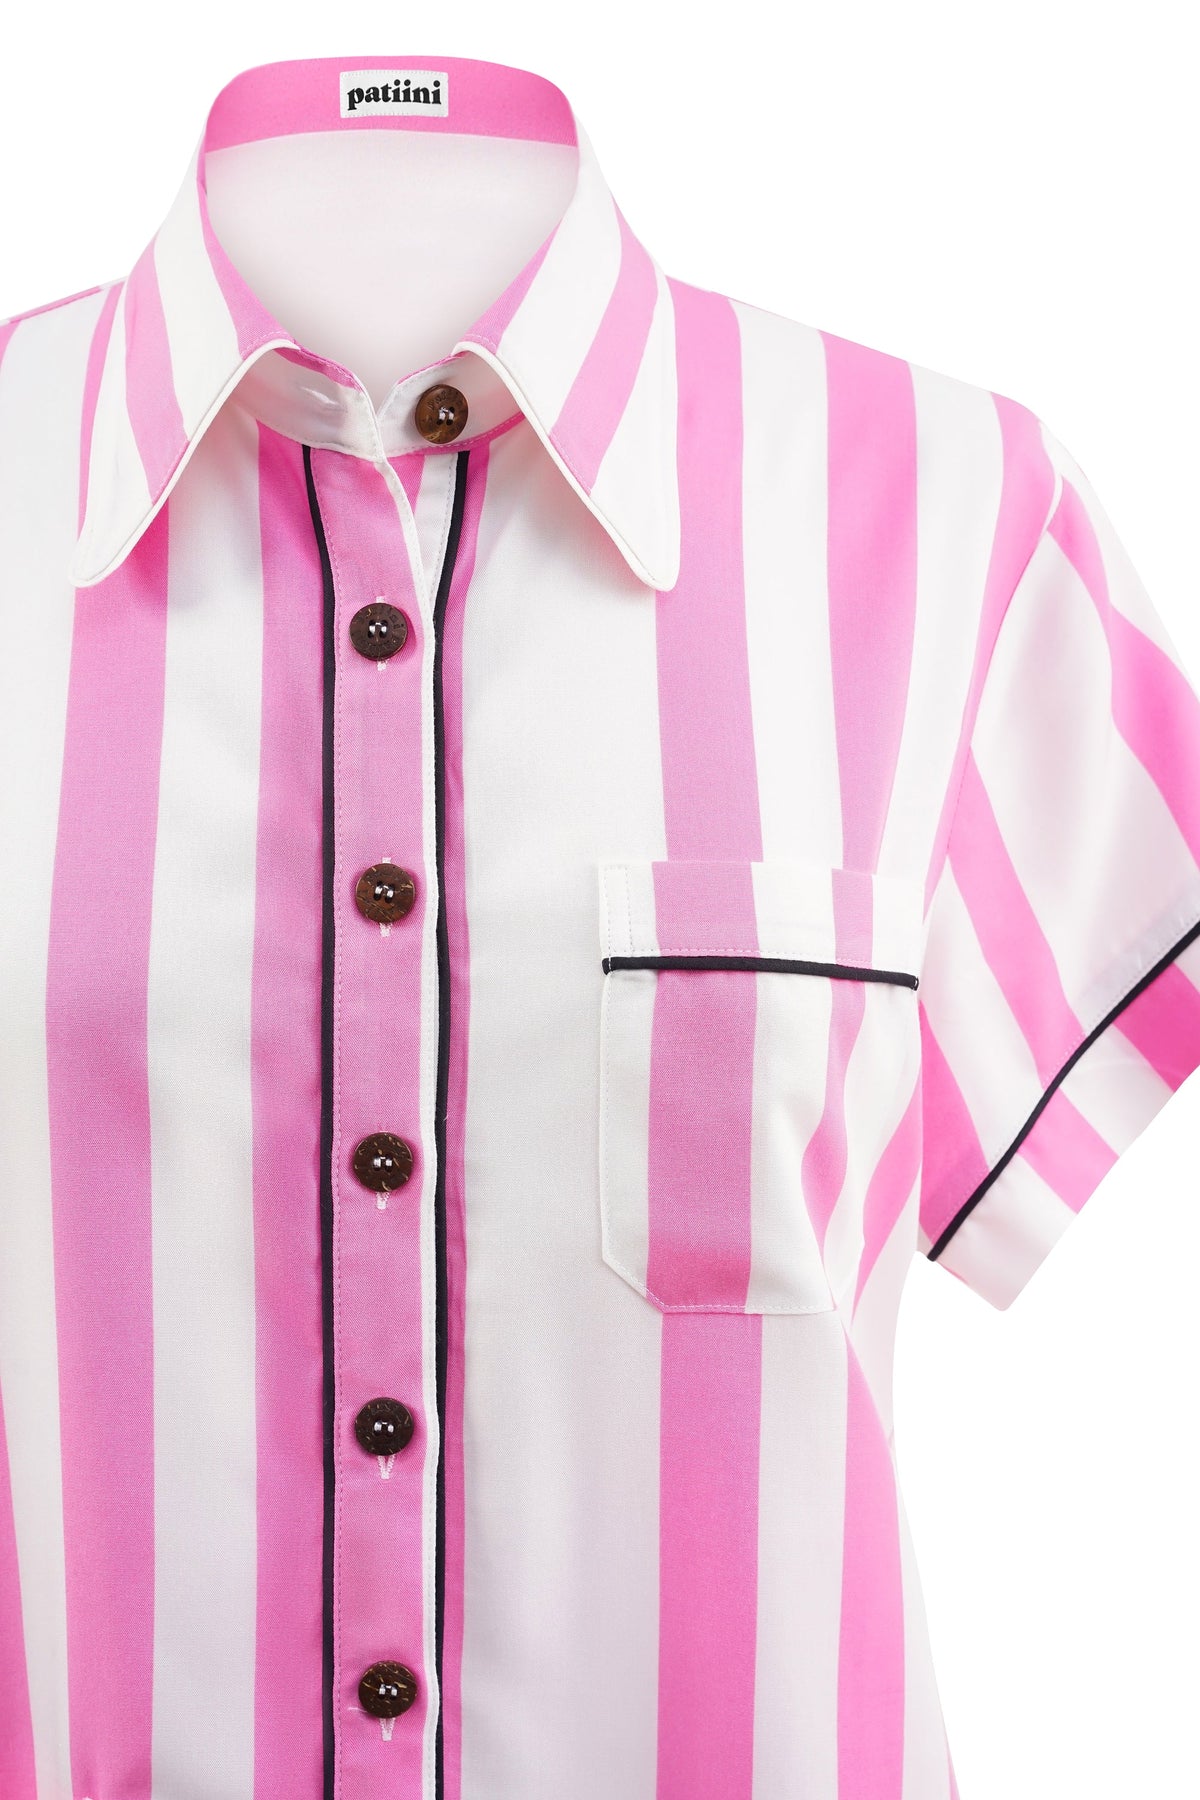 Close-up of a pink and white striped button-down shirt.